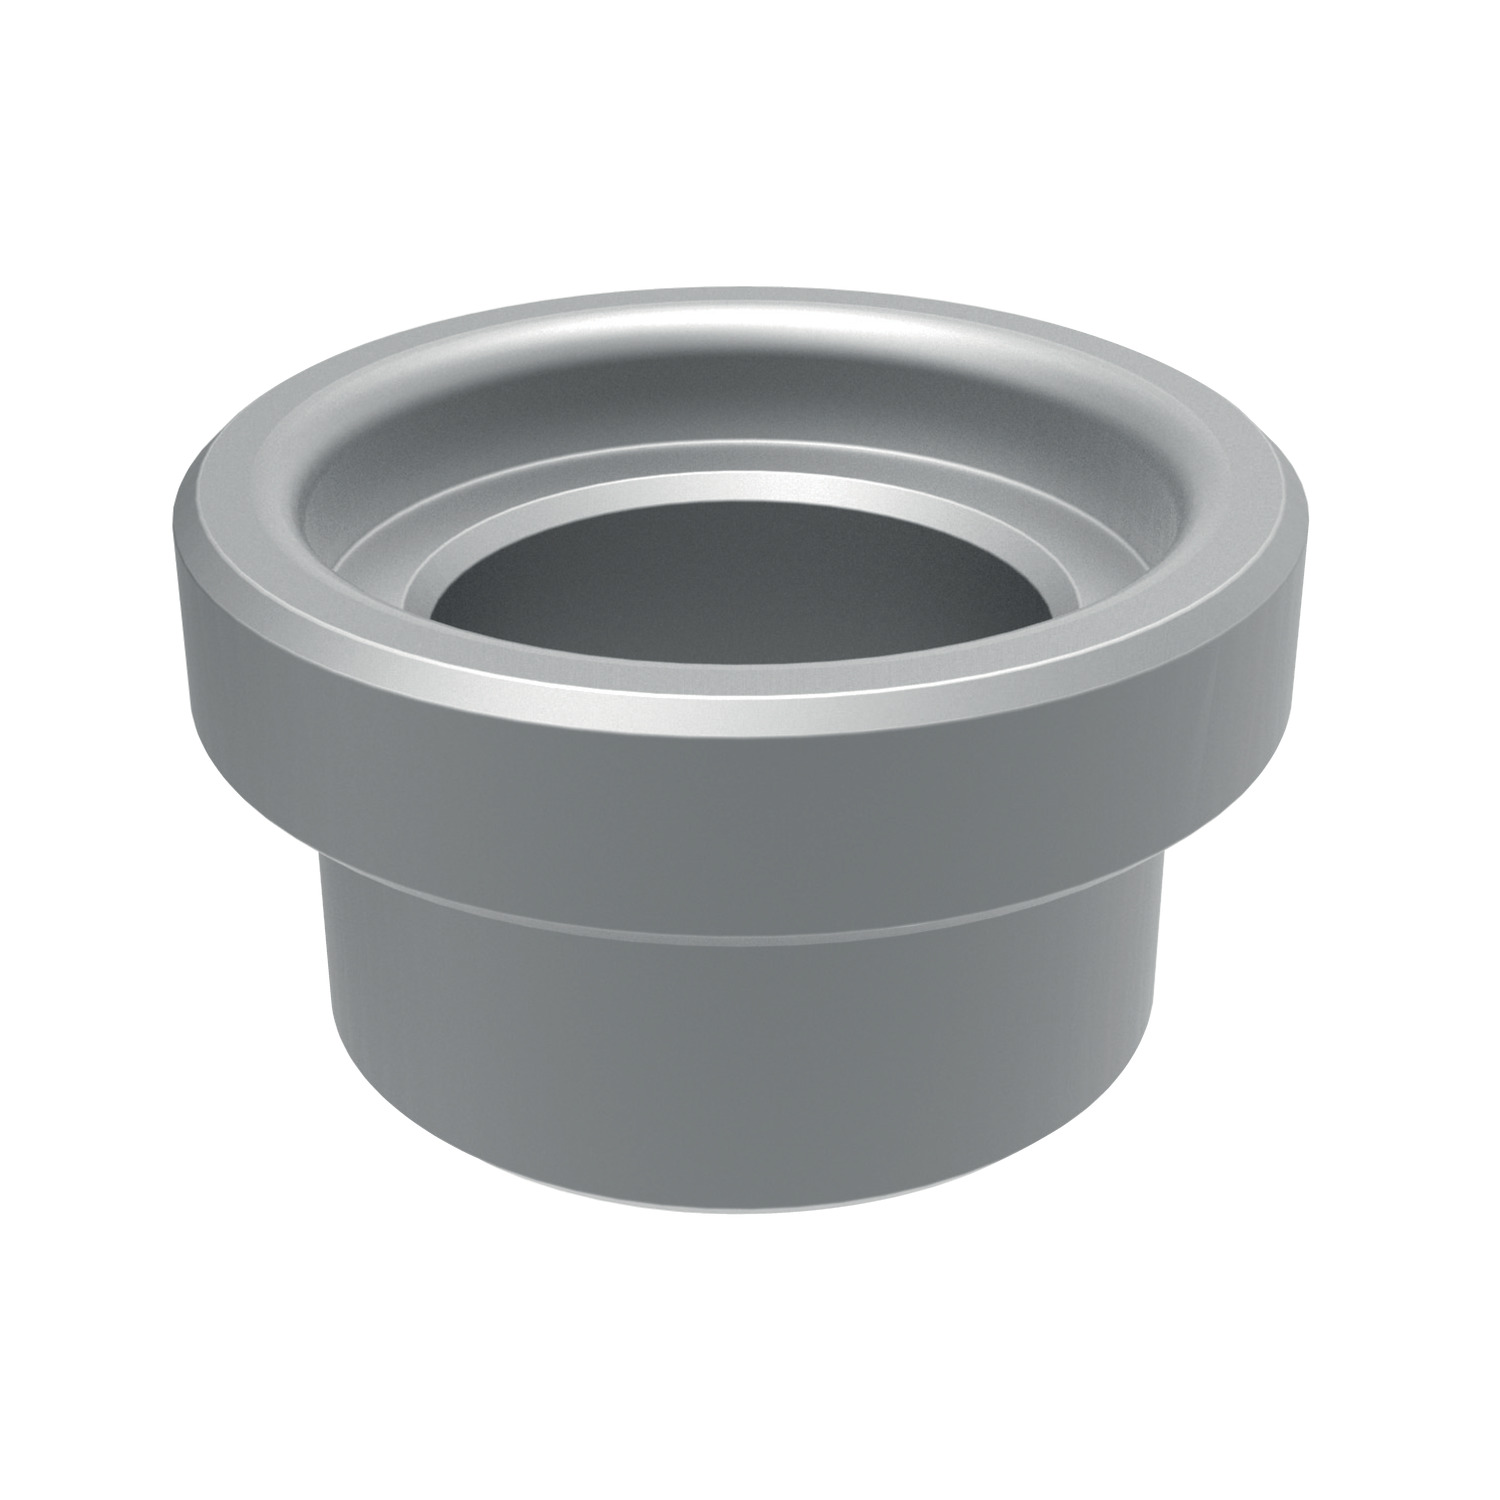 Liner Bushing - Compact Combined with the 12095 locator unit system, this will create the highest possible machining accuracy.